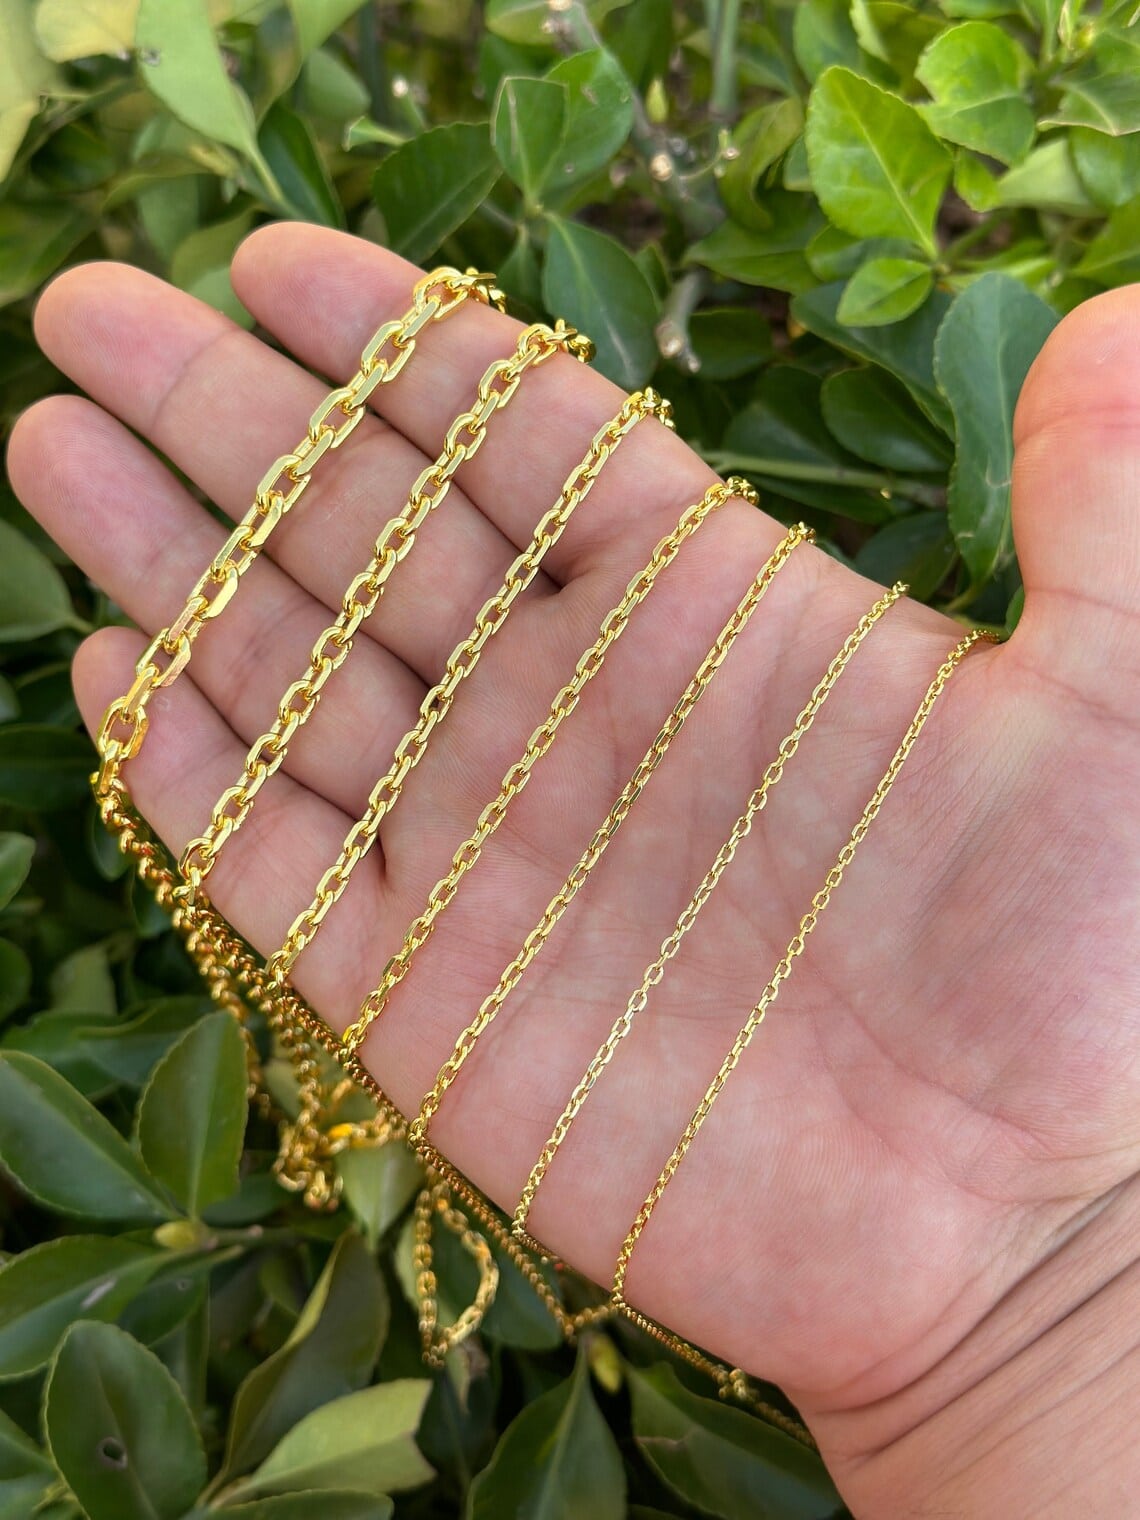 gold plated anchor chains on the hand